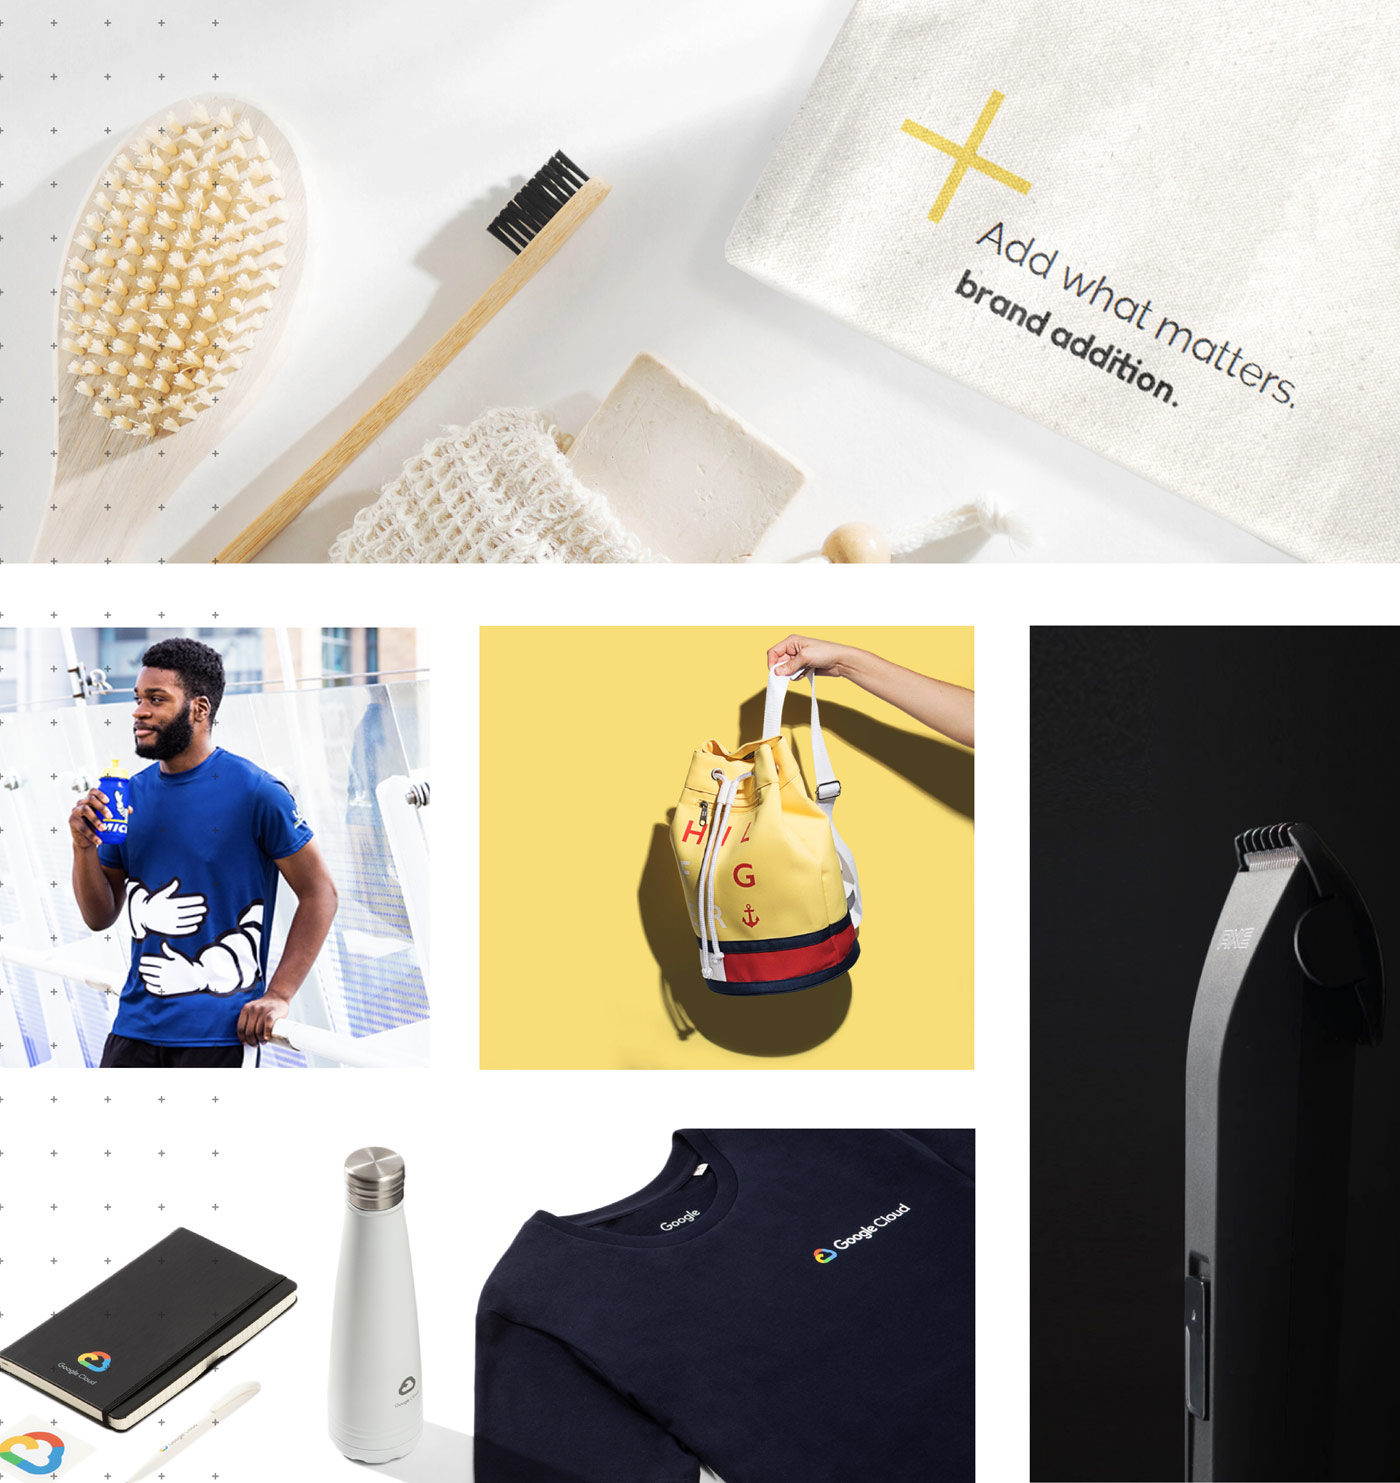 Examples of Brand Addition's promotional items portfolio